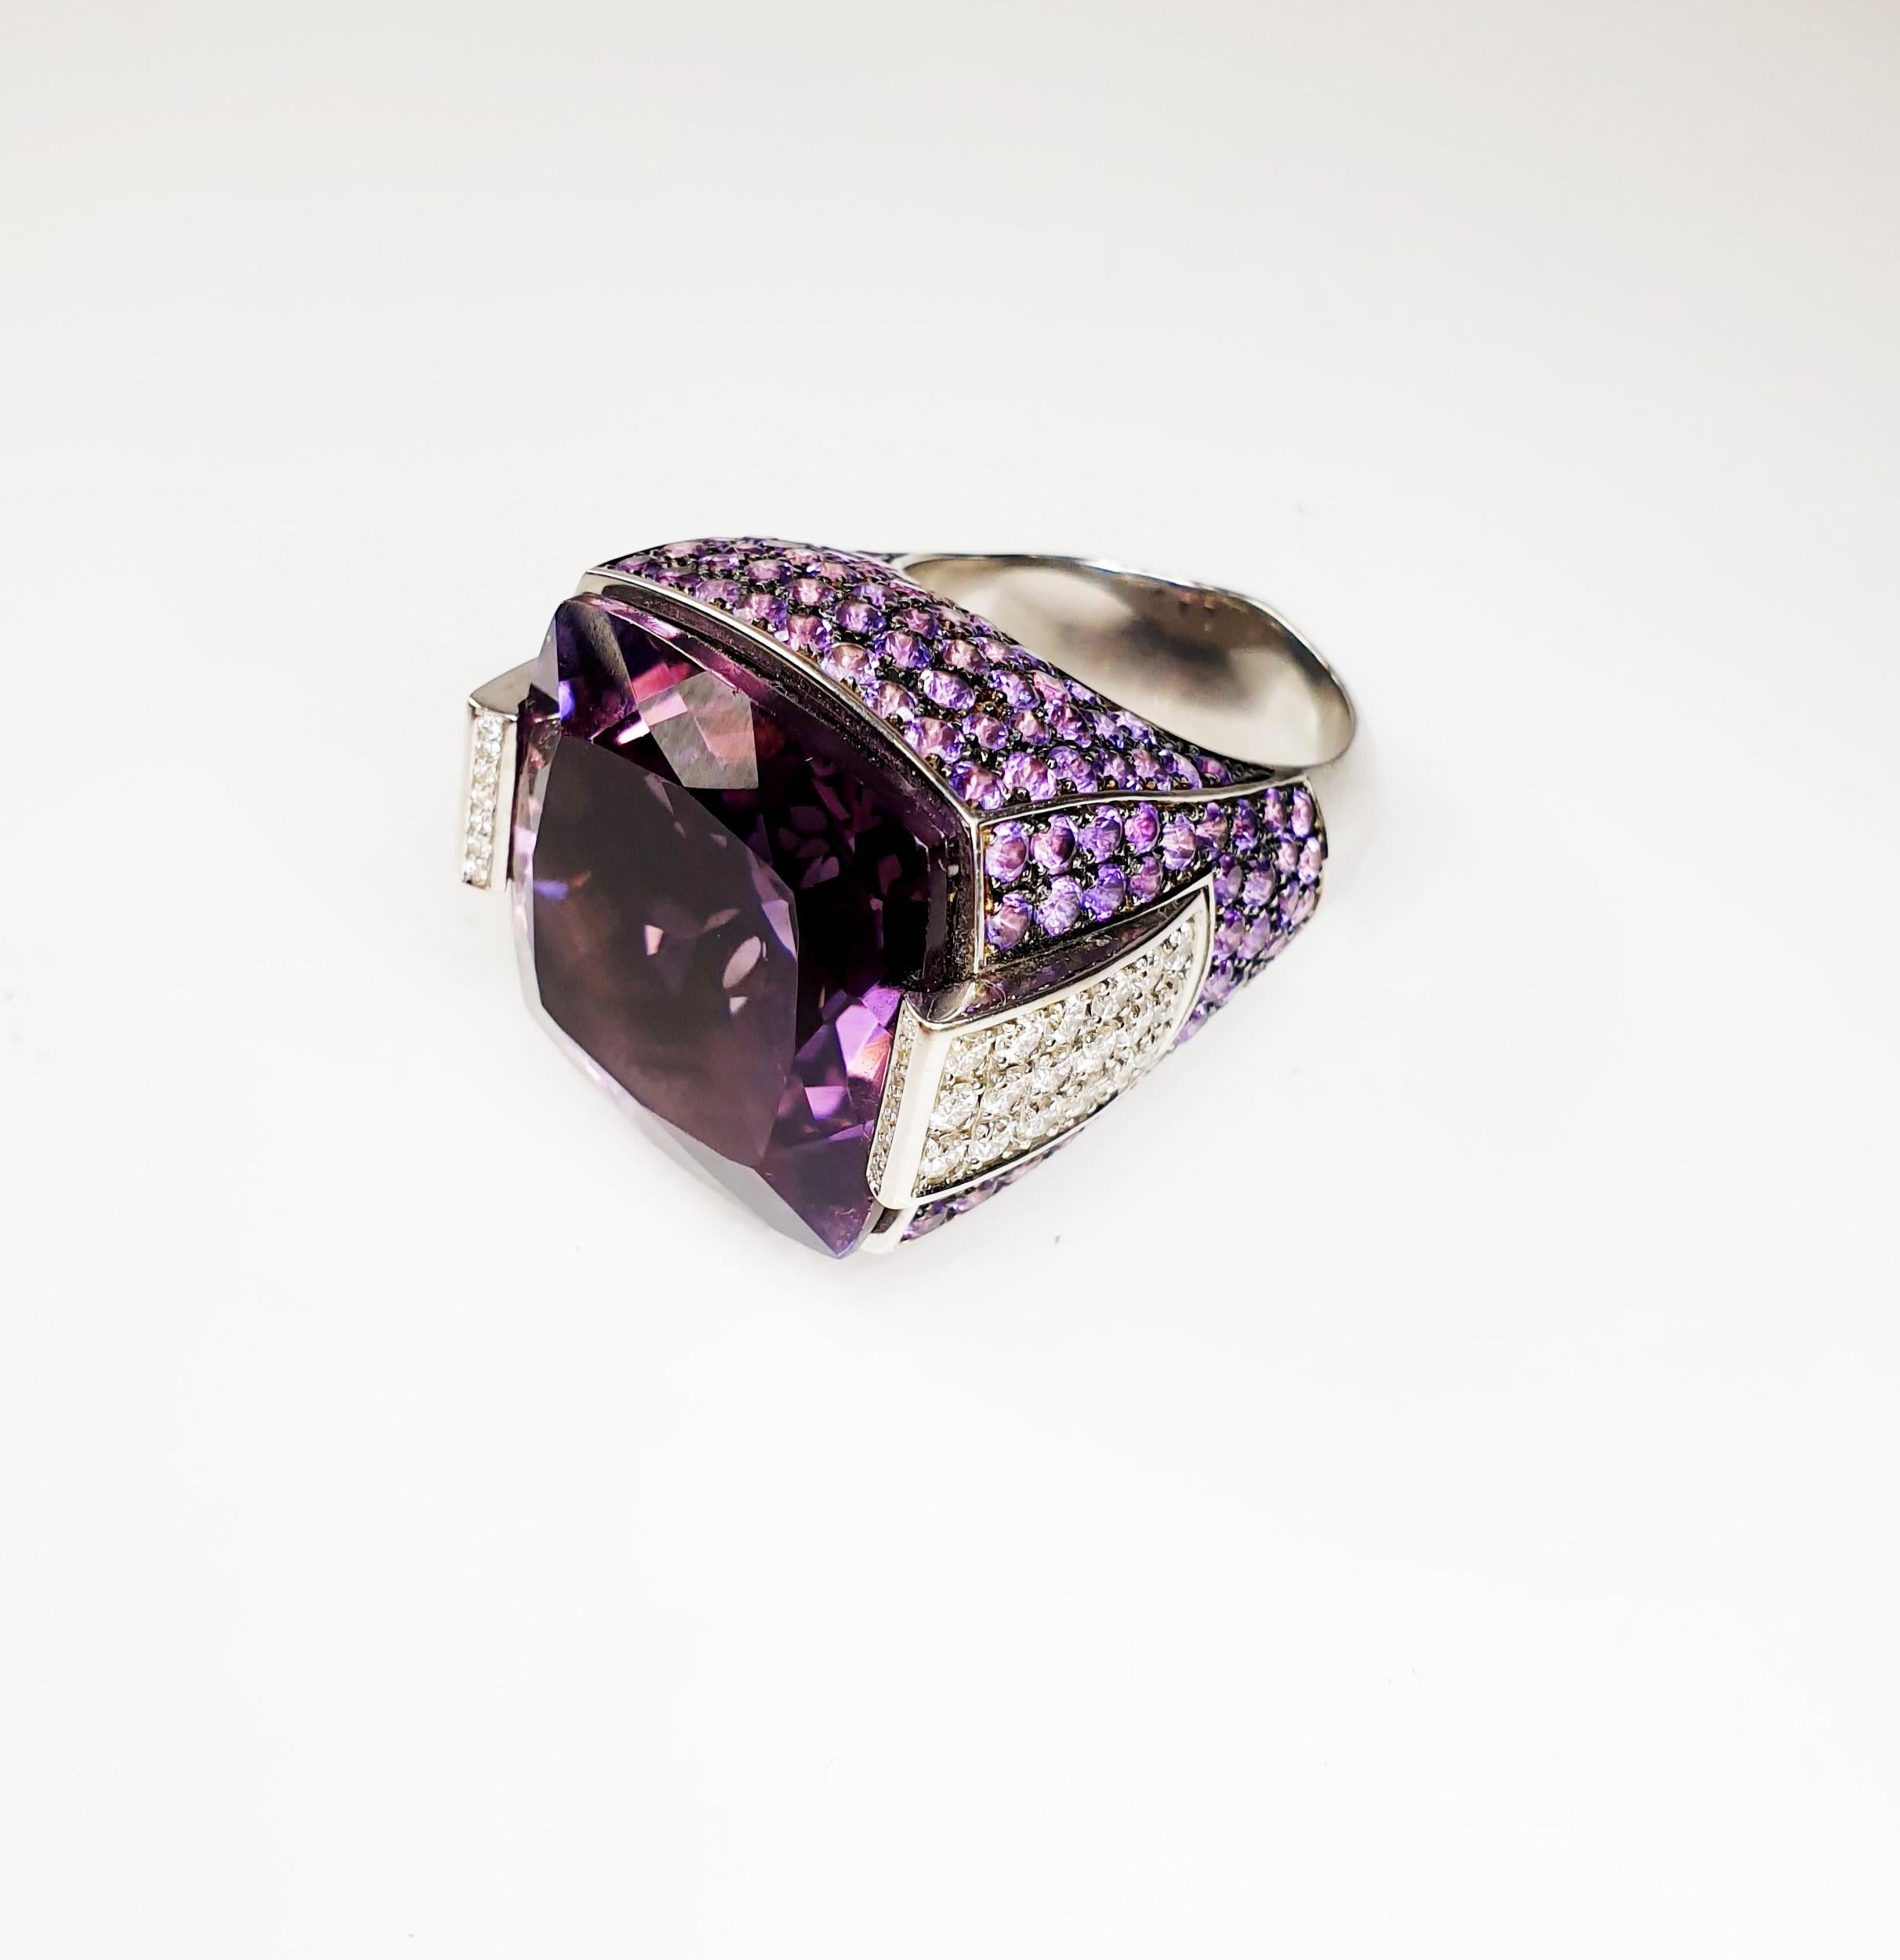 Contemporary Multifaceted 35 Carat Amethyst with Diamonds and 18 Karat White Gold Ring